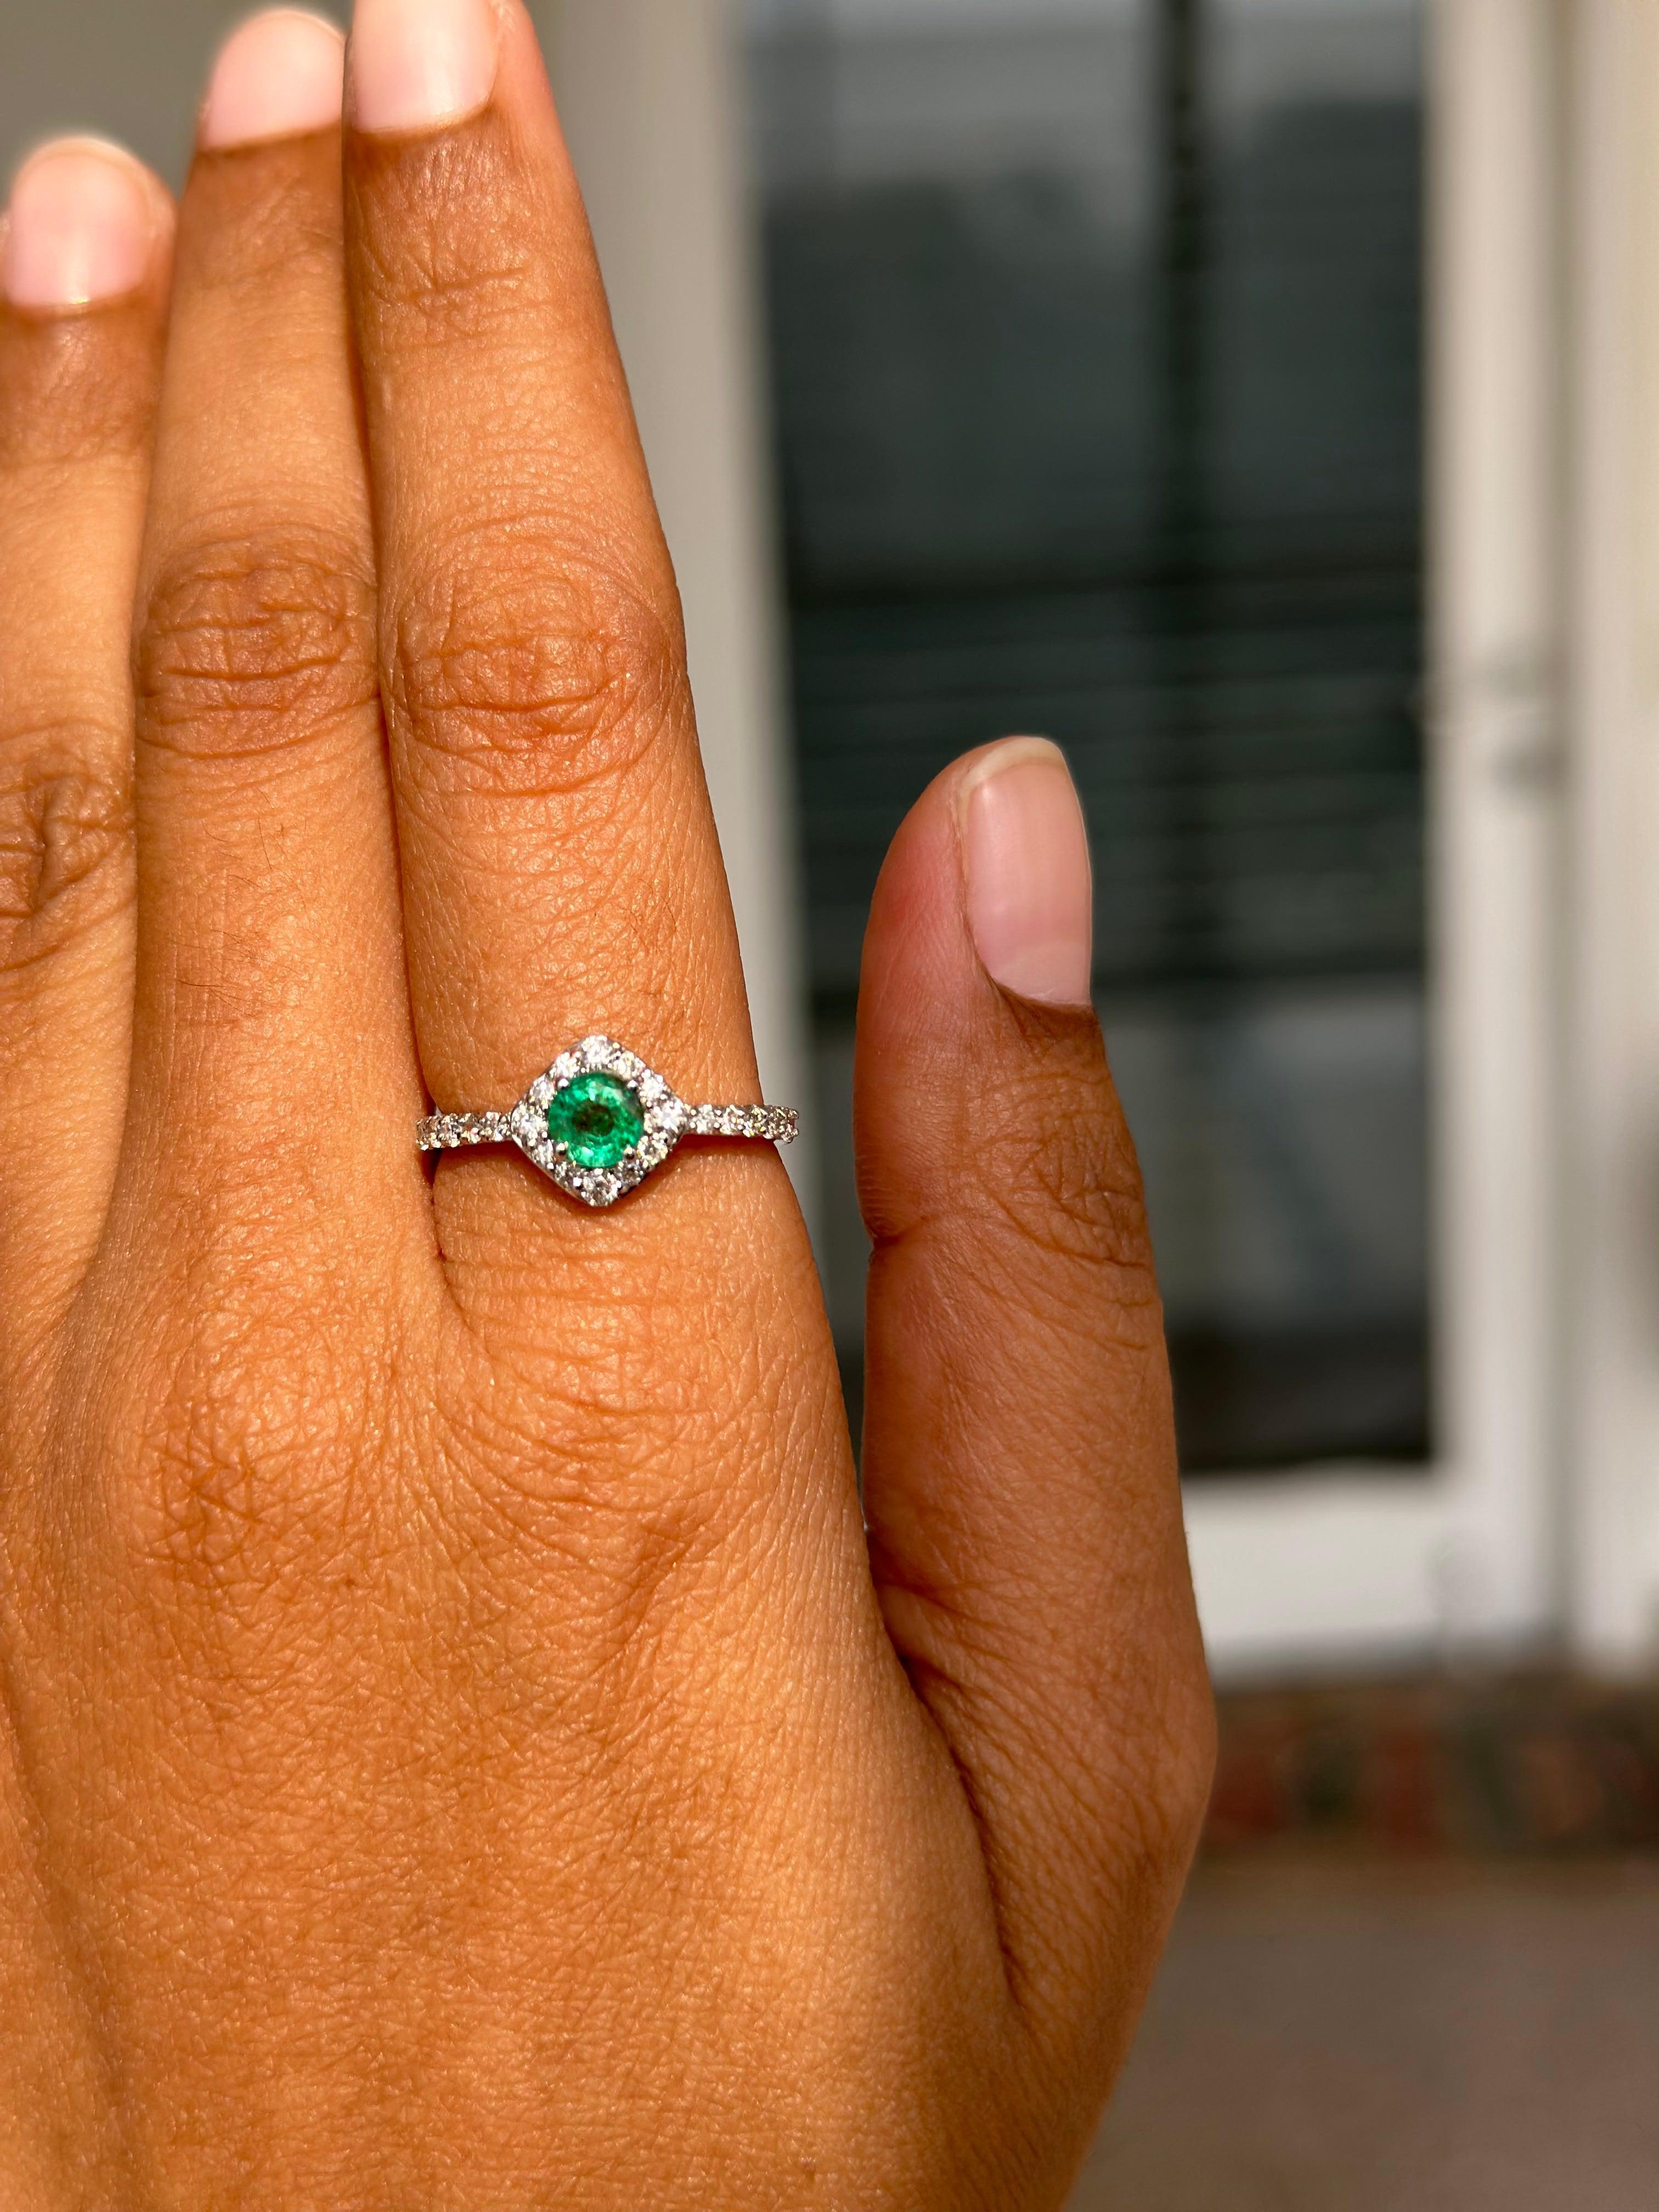 For Sale:  Dainty Halo Diamond Emerald Ring Handcrafted in 14k Solid White Gold 3